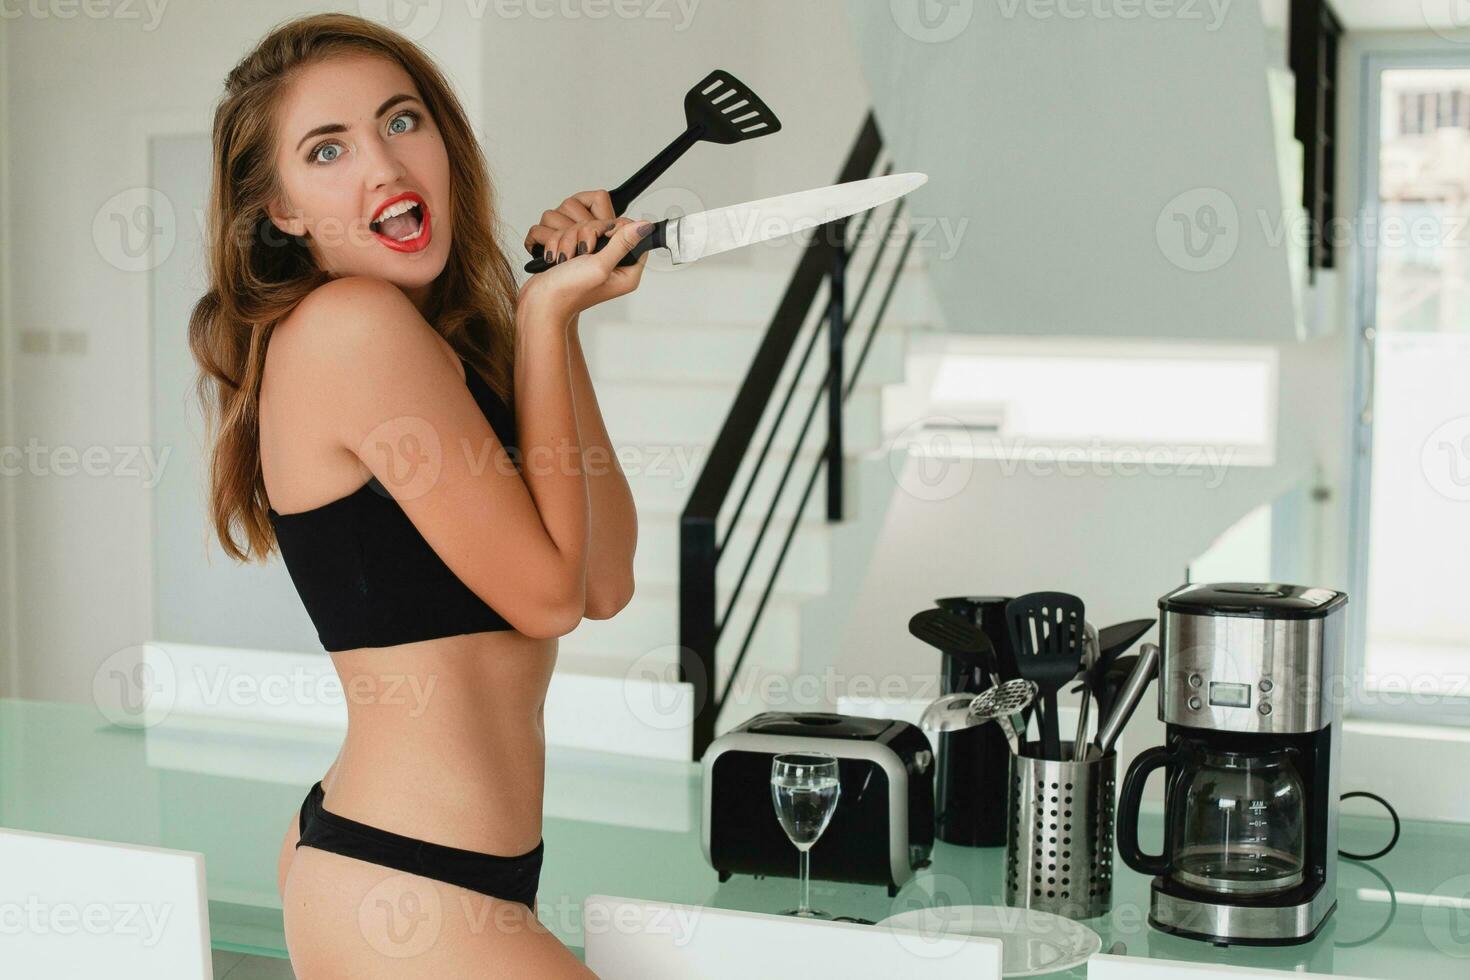 young slim beautiful woman sitting on kitchen table holding knife, sexy, black underwear, housewife, sensual, dinning room, household appliances, skinny body, tanned skin photo